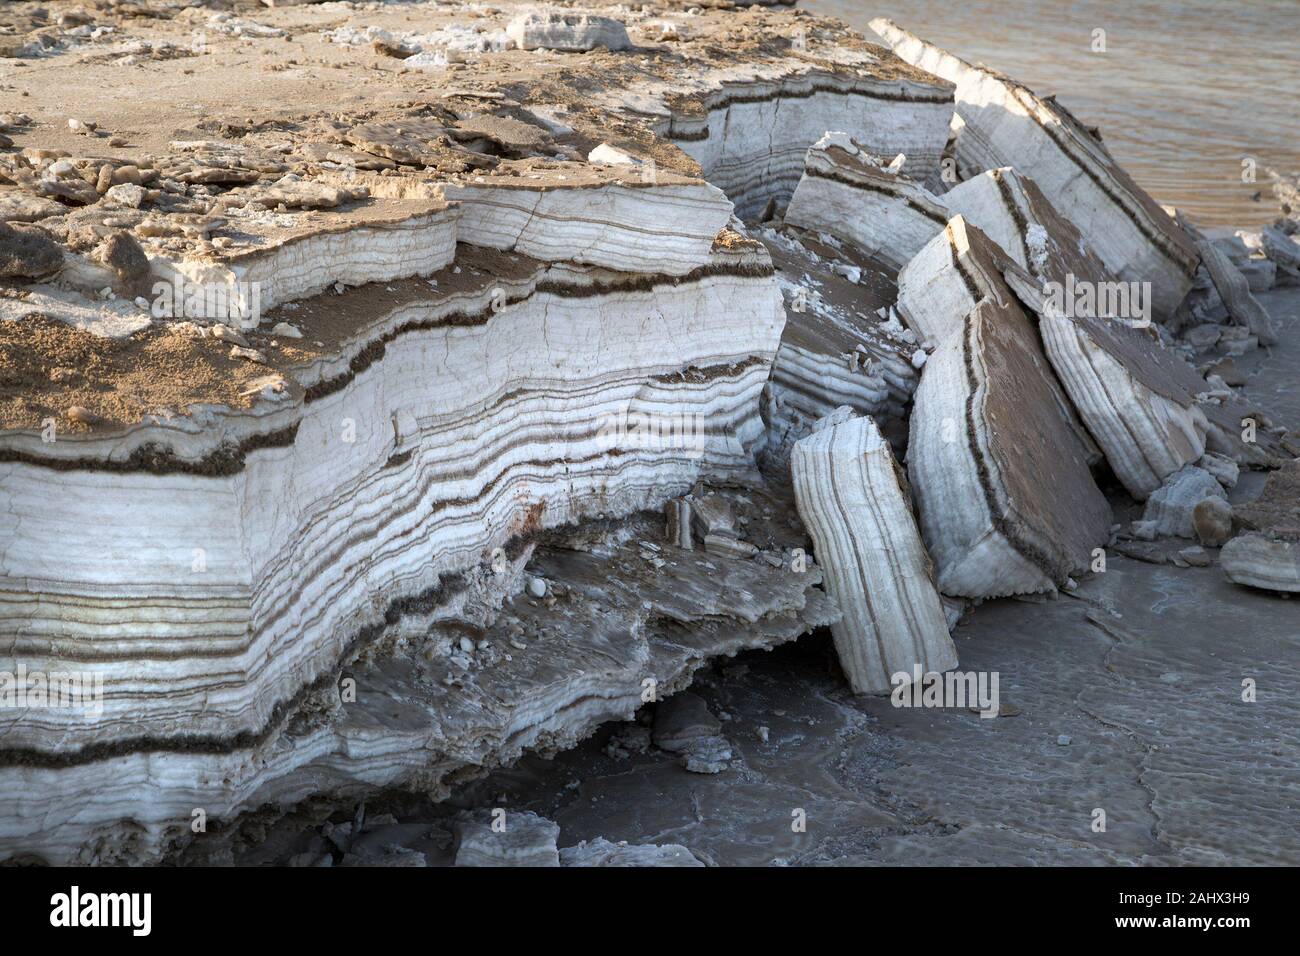 Annual layers of salt and minerals deposited on the shore of the Dead Sea, exposed by dropping water levels. Stock Photo